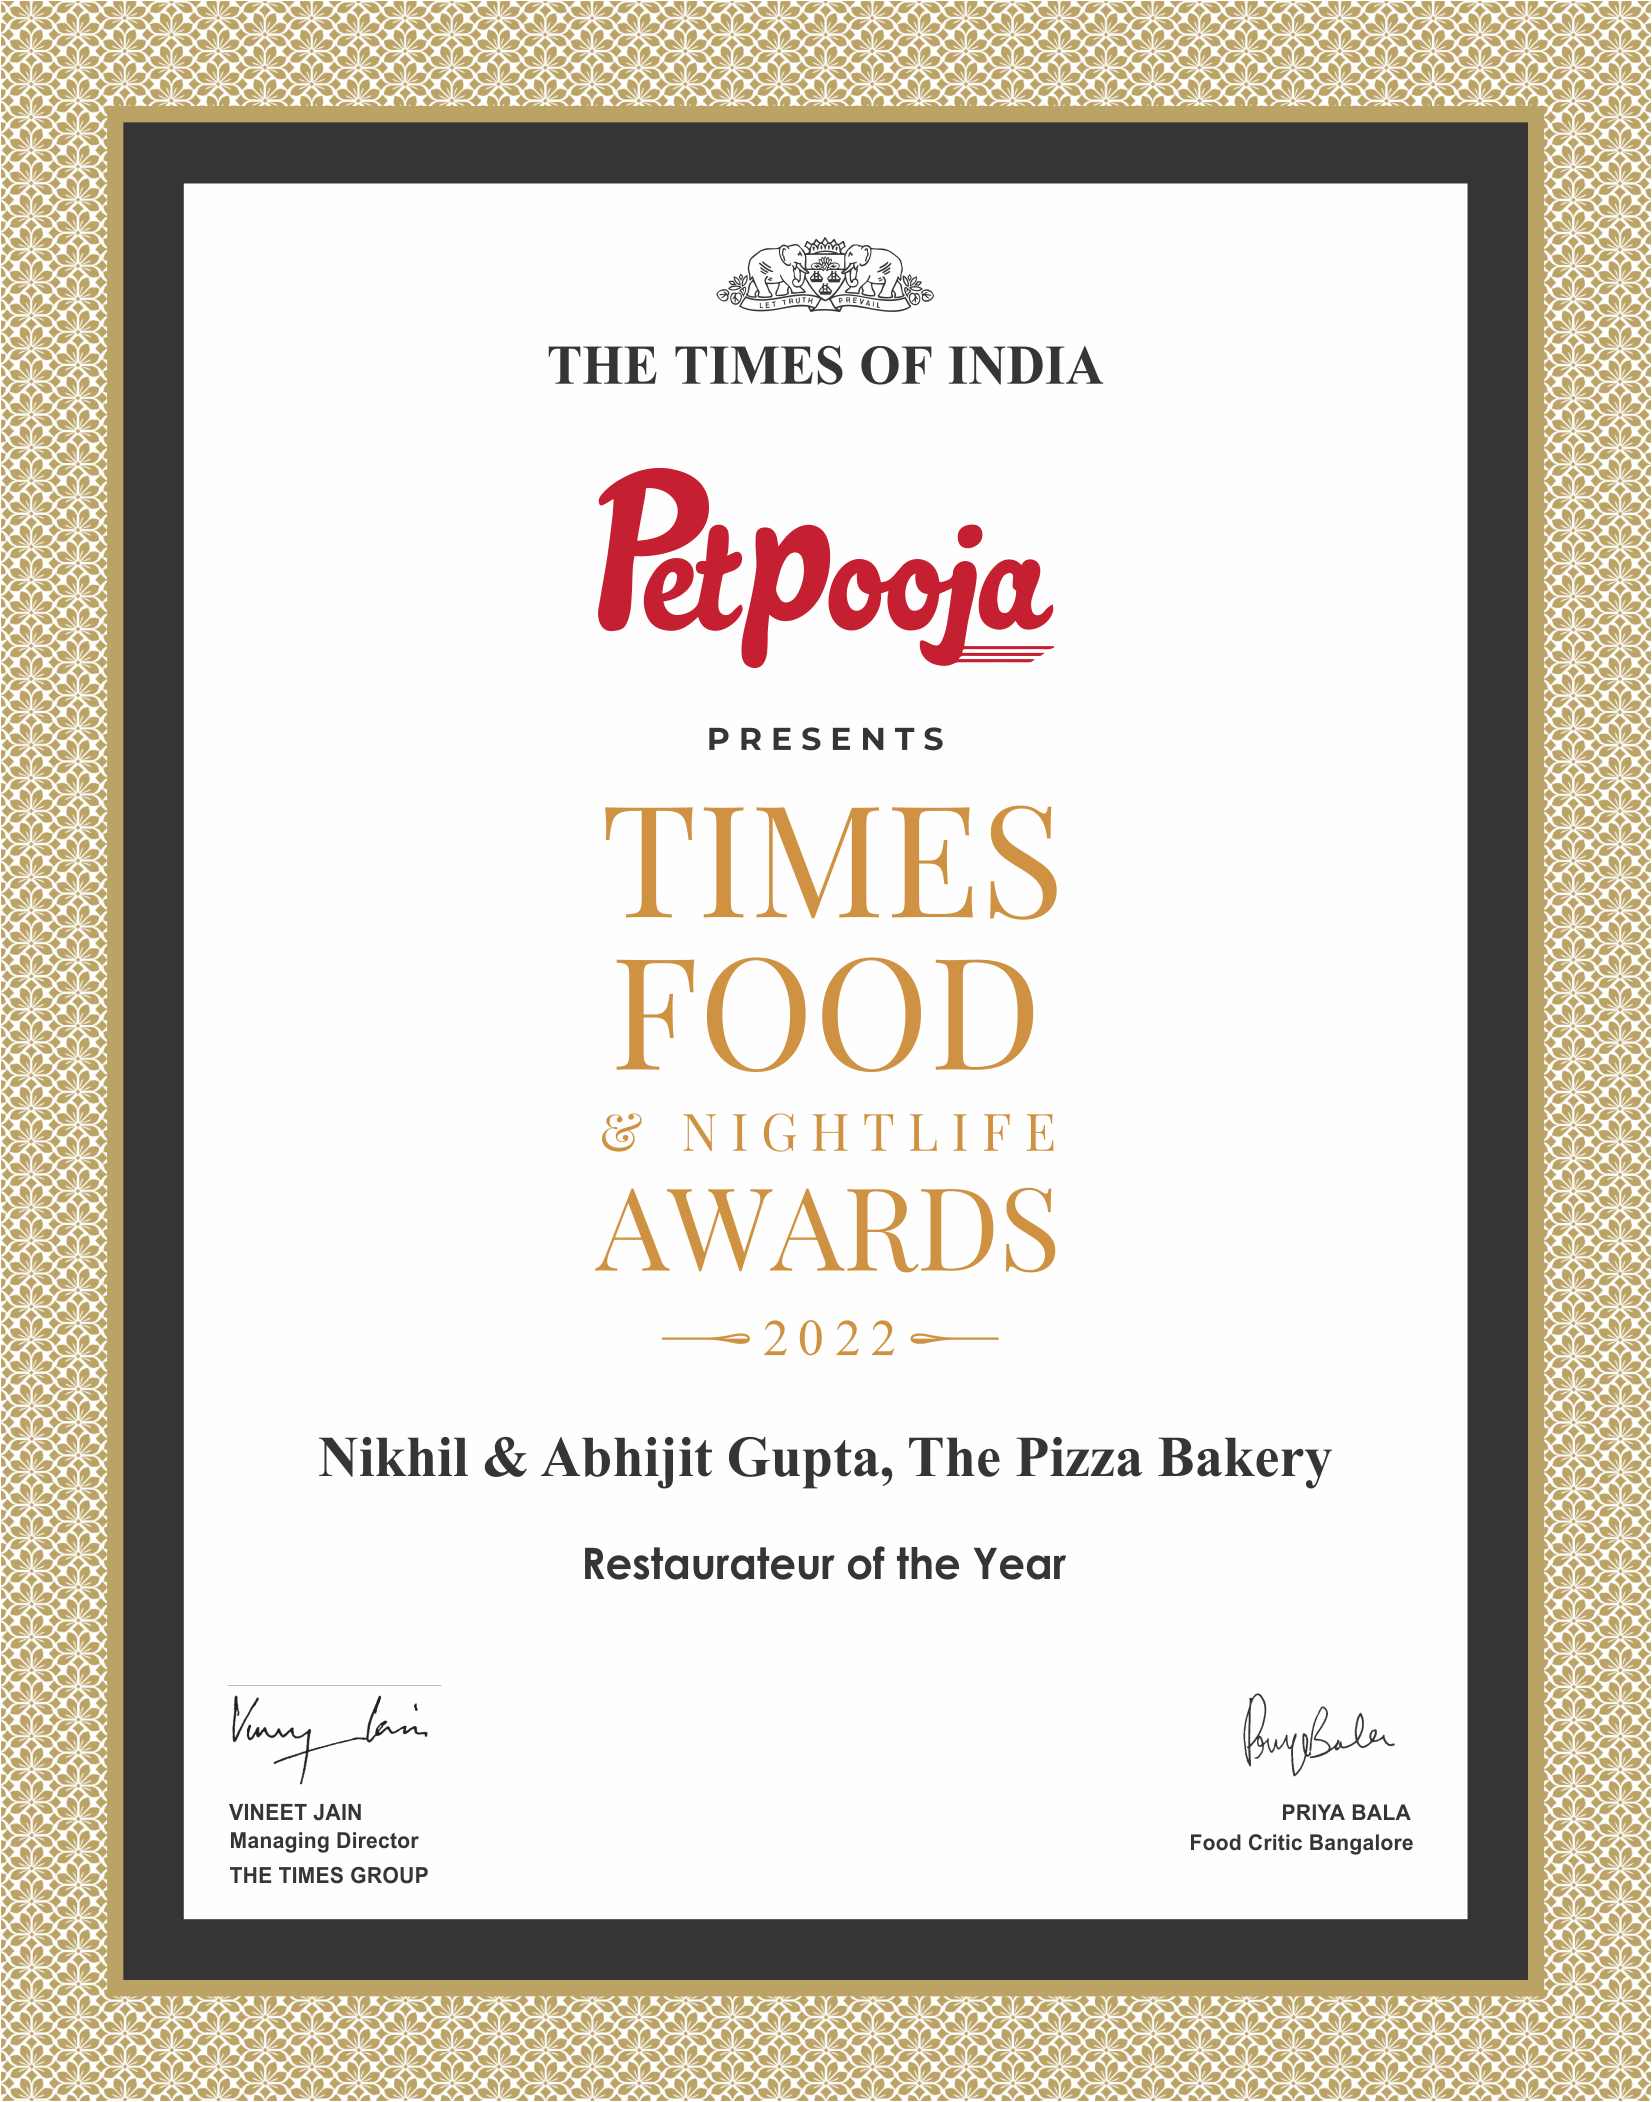 Times Food Awards 2022 – Restaurateur of the Year